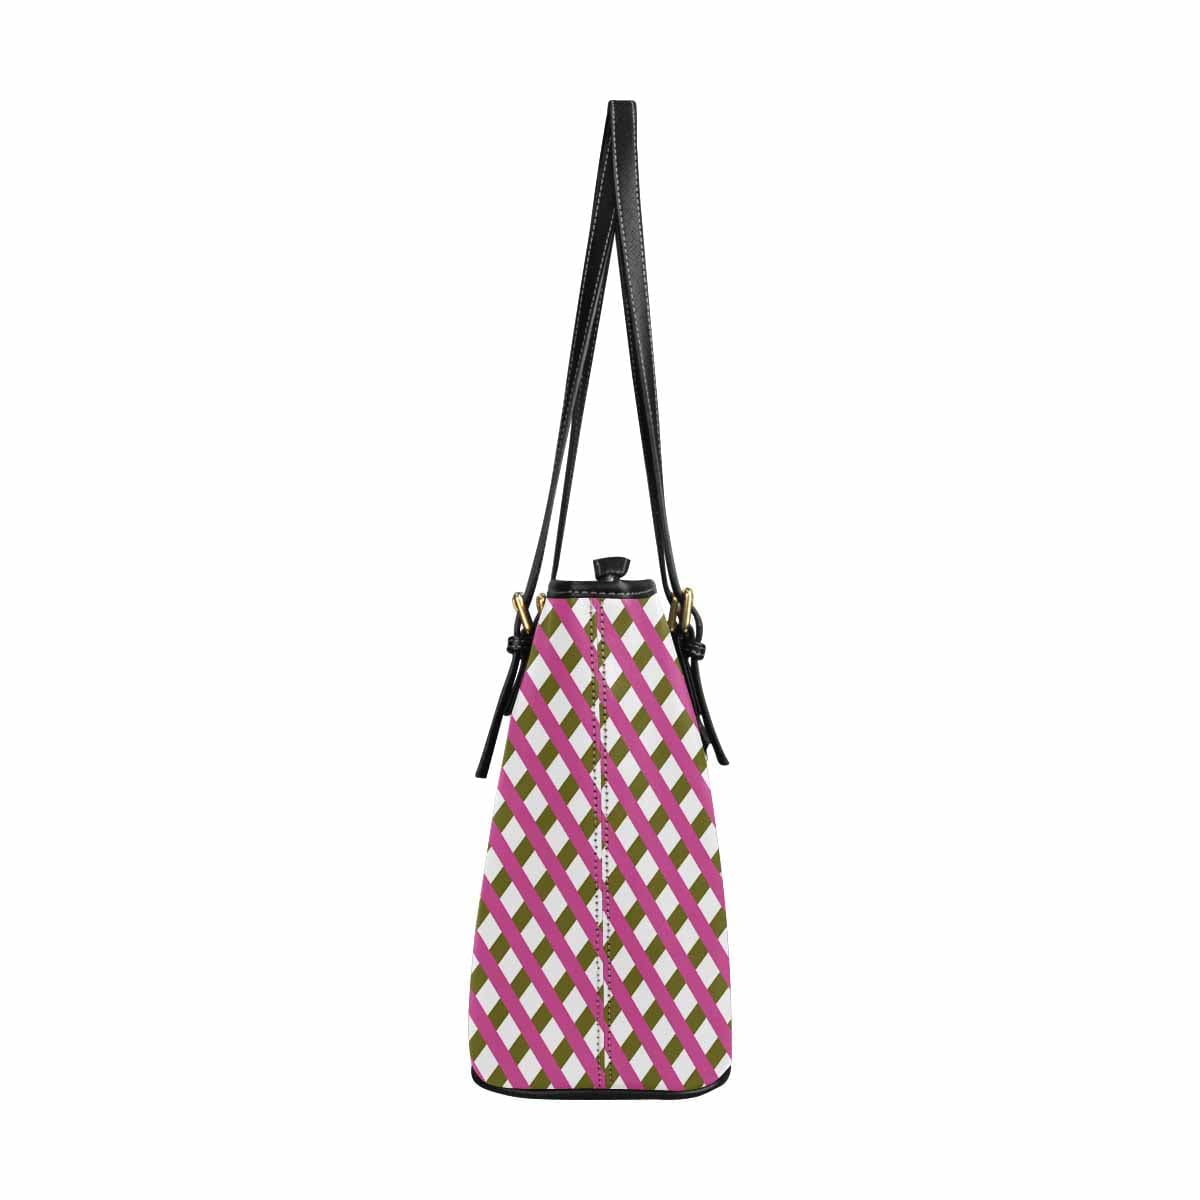 Large Leather Tote Shoulder Bag - Crosshatch Pink Tote - Bags | Leather Tote